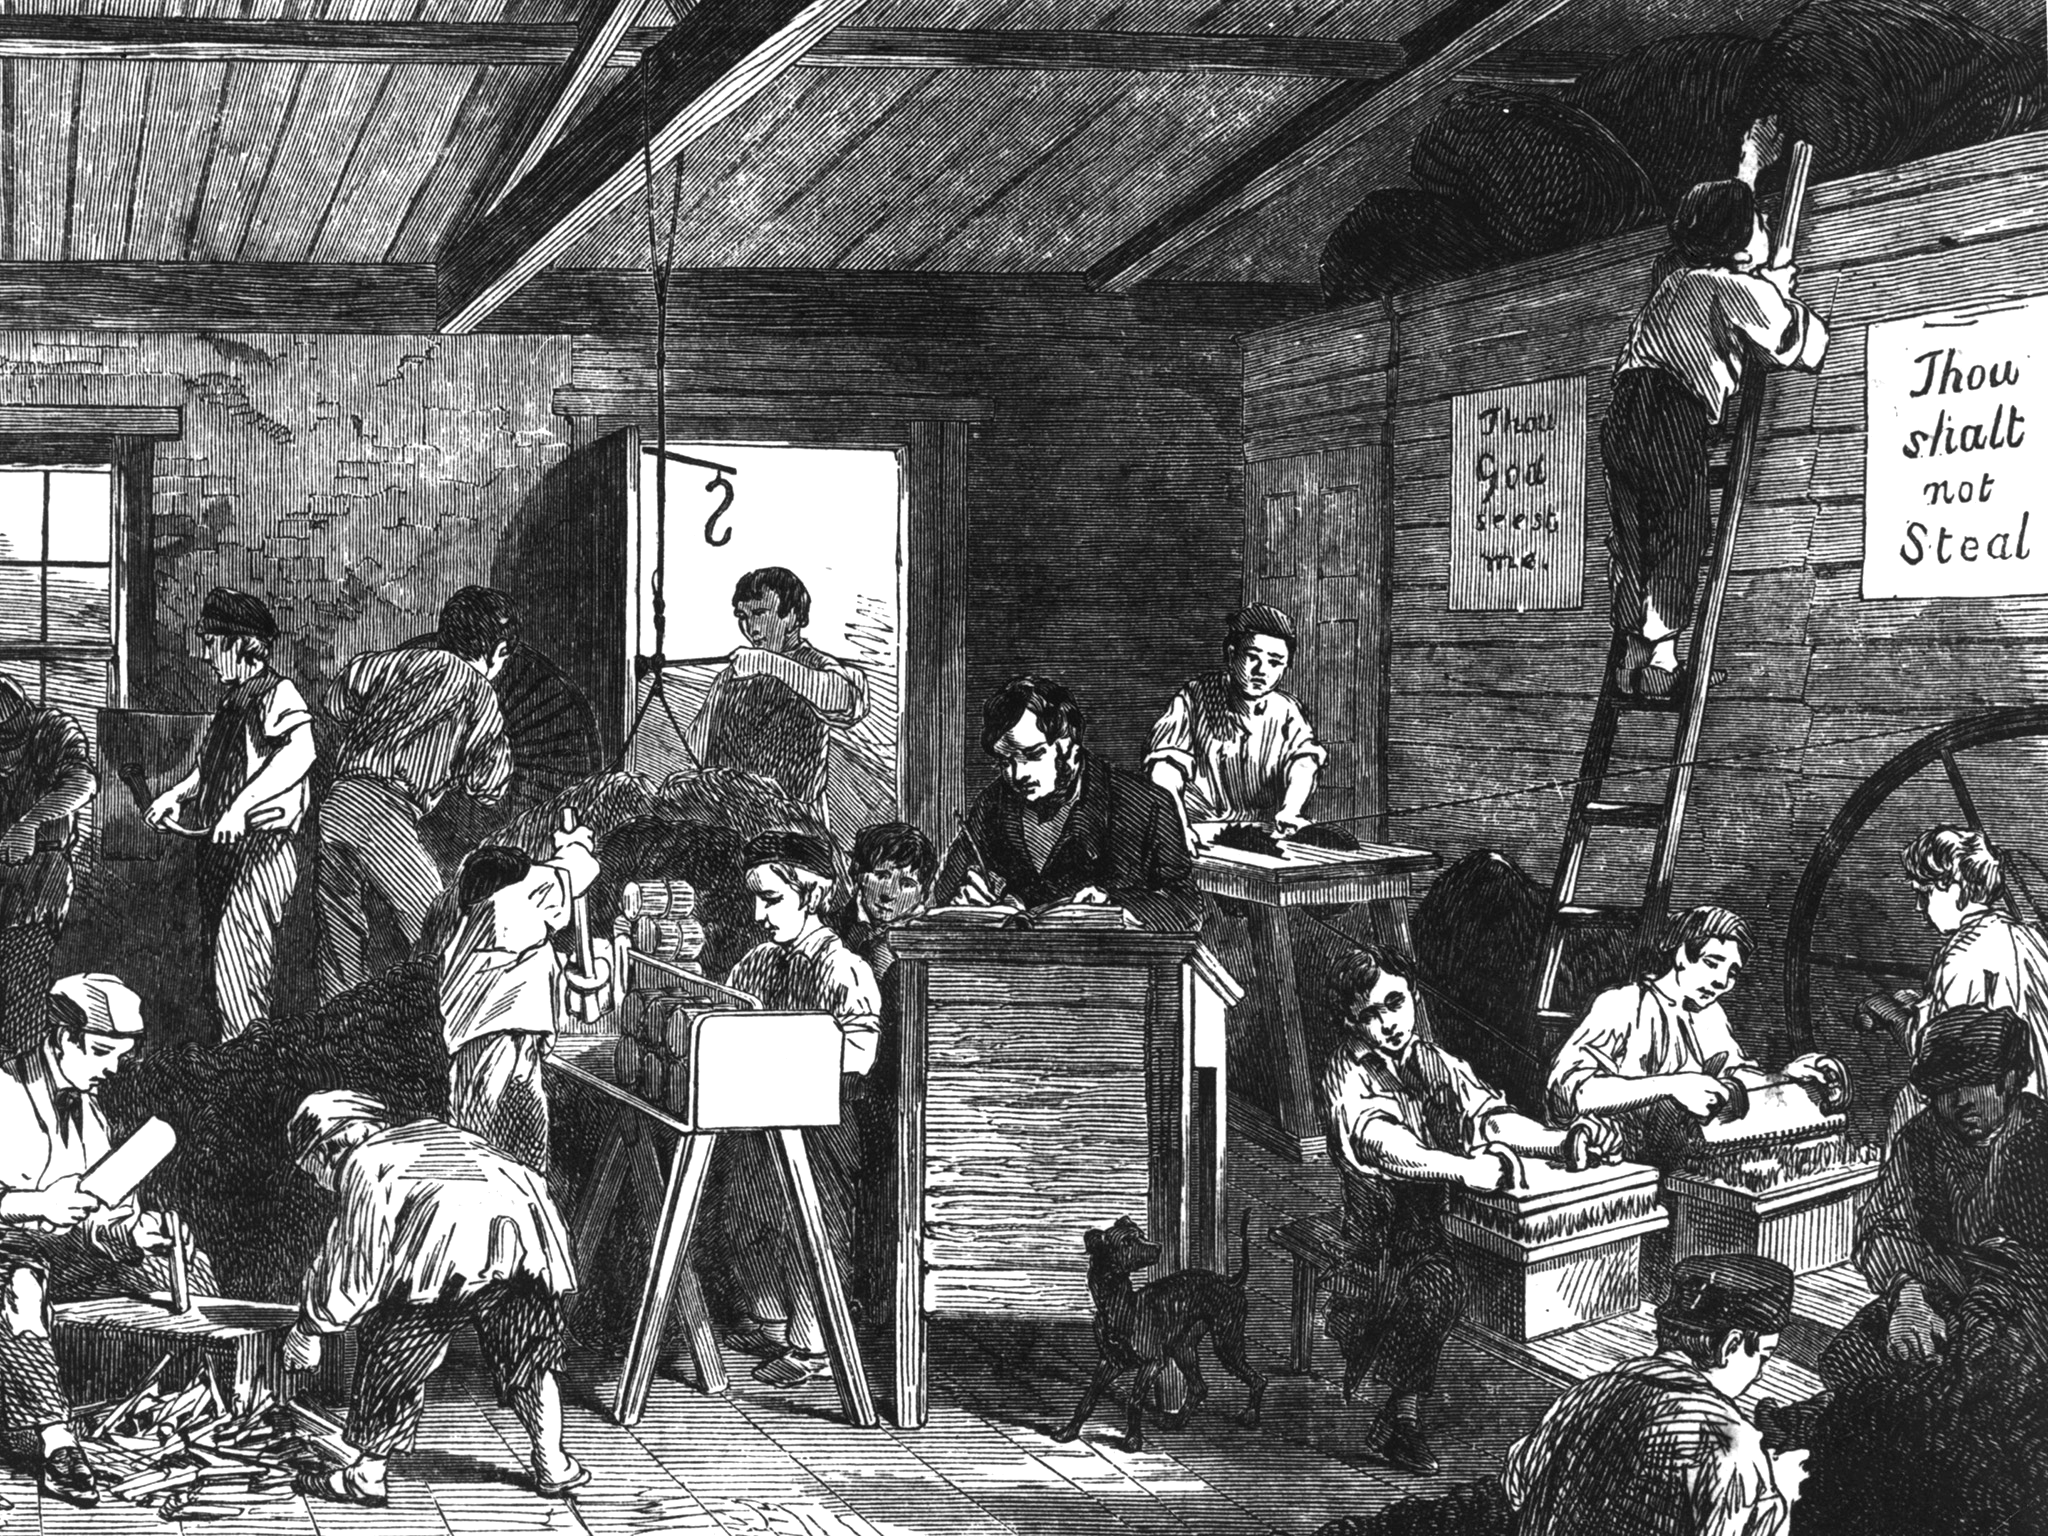 A scene from an industrial school, circa 1846